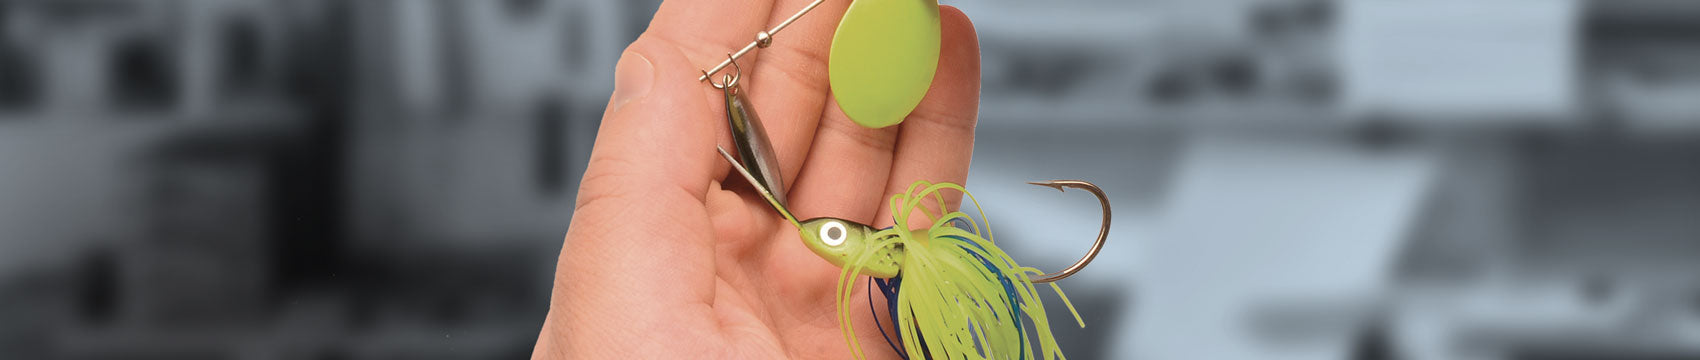 spinner bait supplies, spinner bait supplies Suppliers and